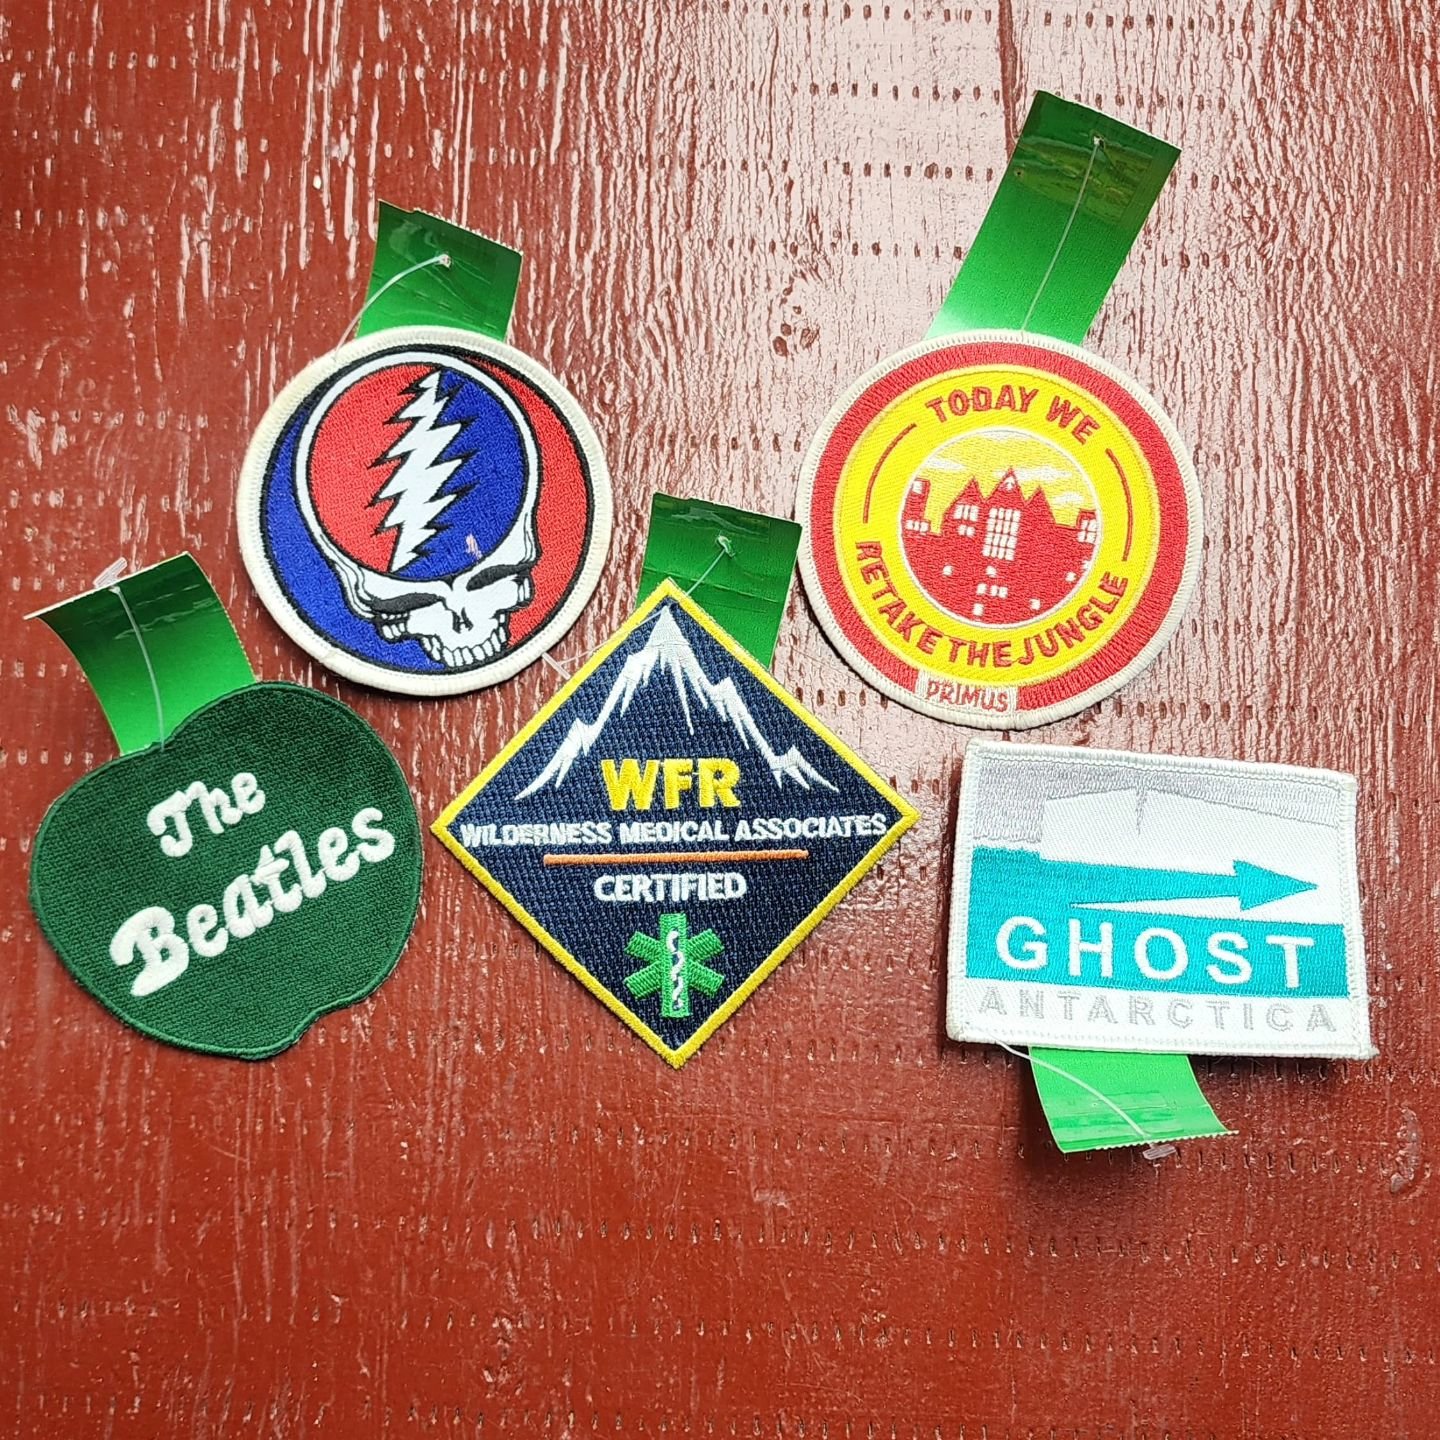 A variety of fun patches!!
($2-$4)

#fortcollins #fortcollinscolorado #lovelandcolorado #windsorcolorado #noco #csu #coloradostateuniversity #consignment #smallbusiness #outdoorgear #sportinggoods #keepgeargoing #localbusiness #retail #thrift #thrift